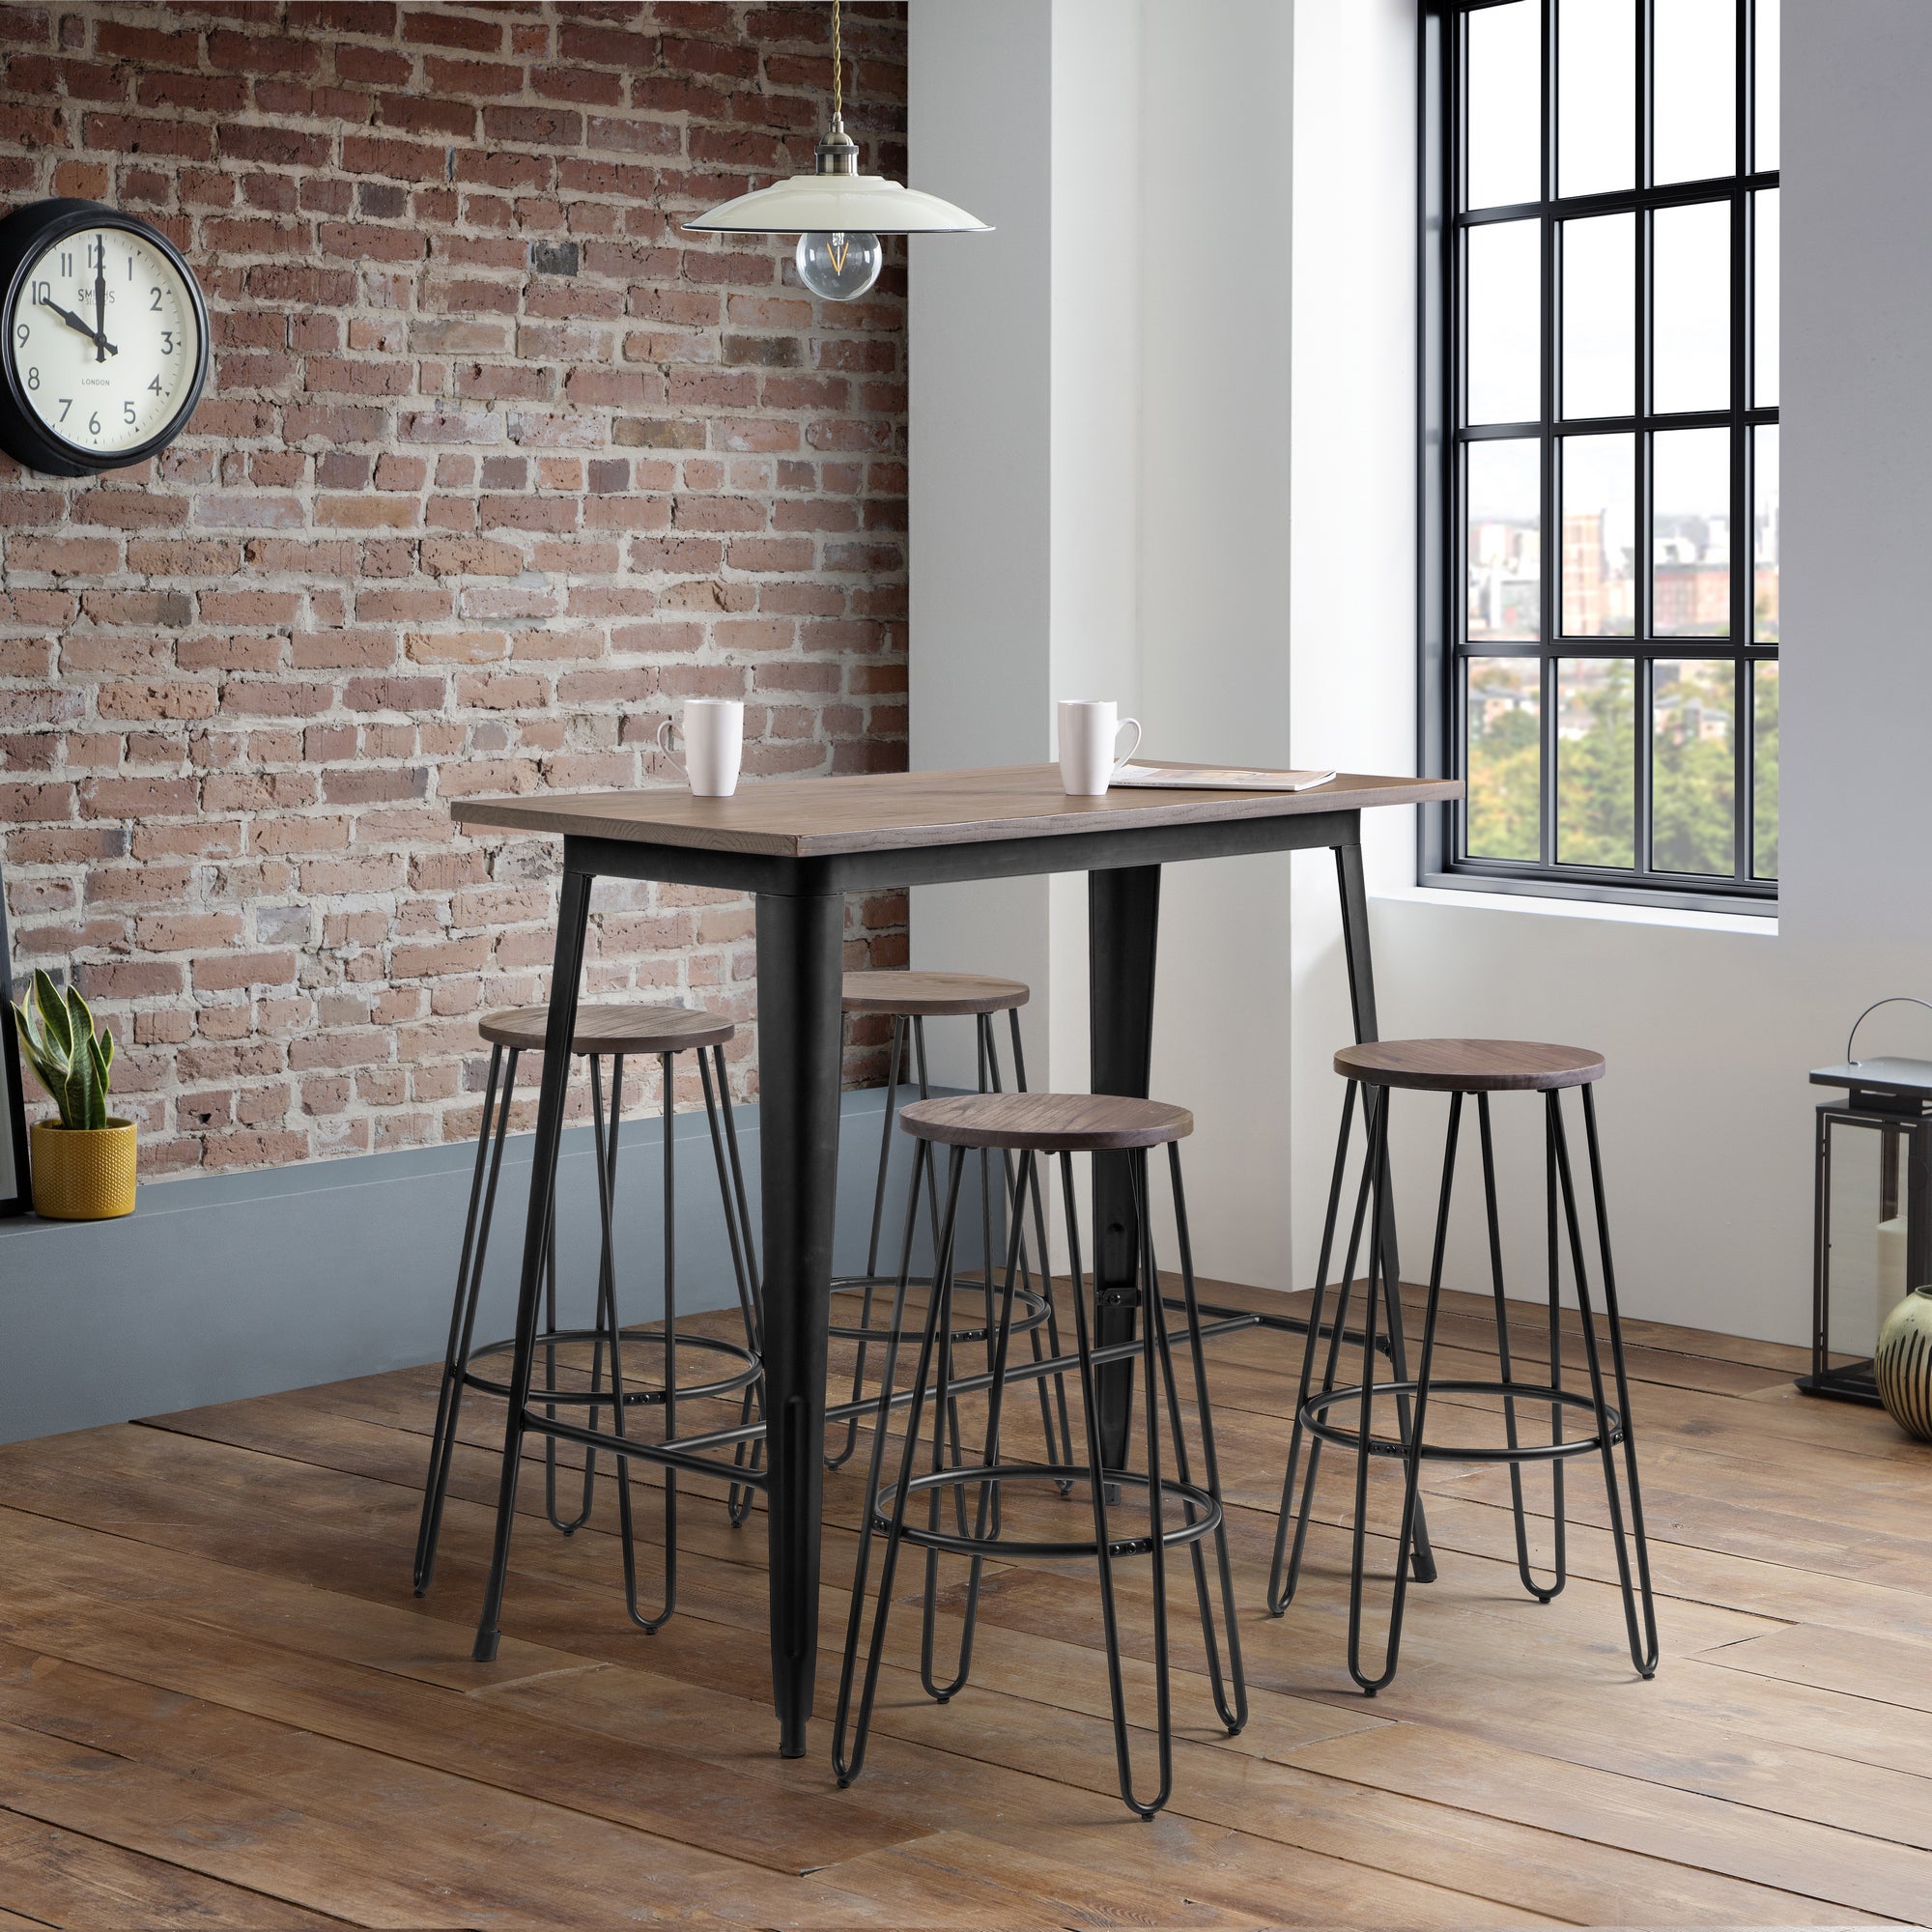 Grafton Rectangular Bar Table With 4 Dalston Stools Brown Brown